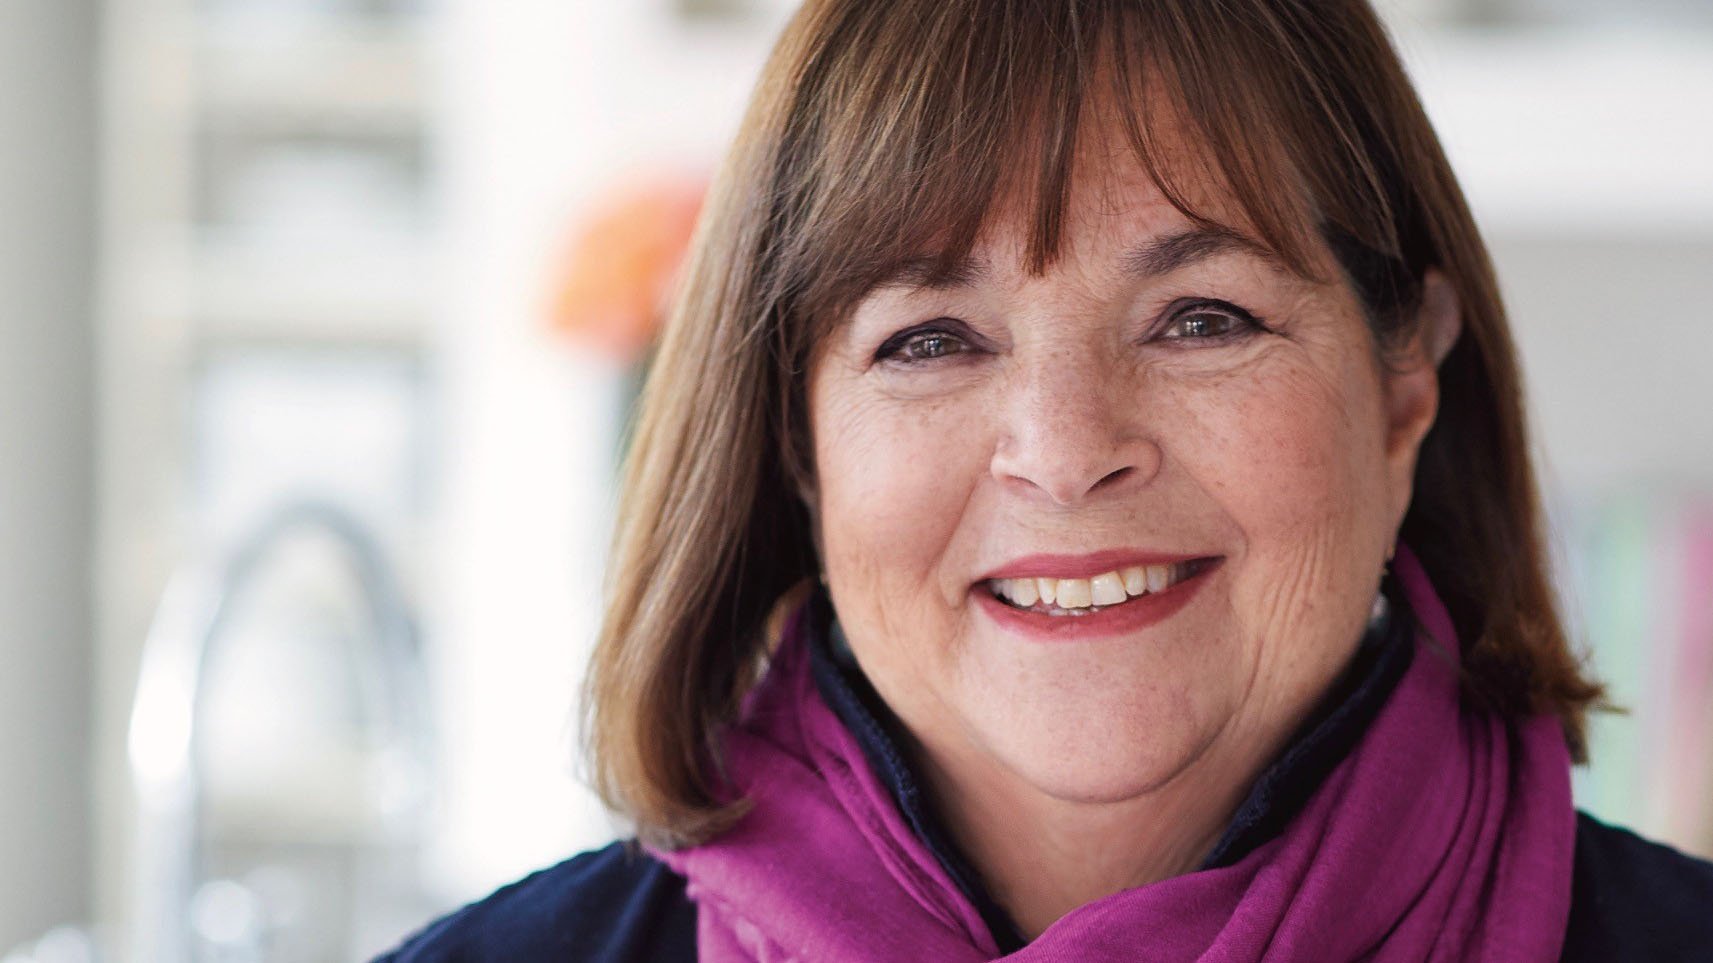 Ina Garten. Courtesy of MODERN COMFORT FOOD: A Barefoot Contessa Cookbook. Copyright © 2020 by Ina Garten. Photography by Quentin Bacon. Published by Clarkson Potter, an imprint of Penguin Random House.